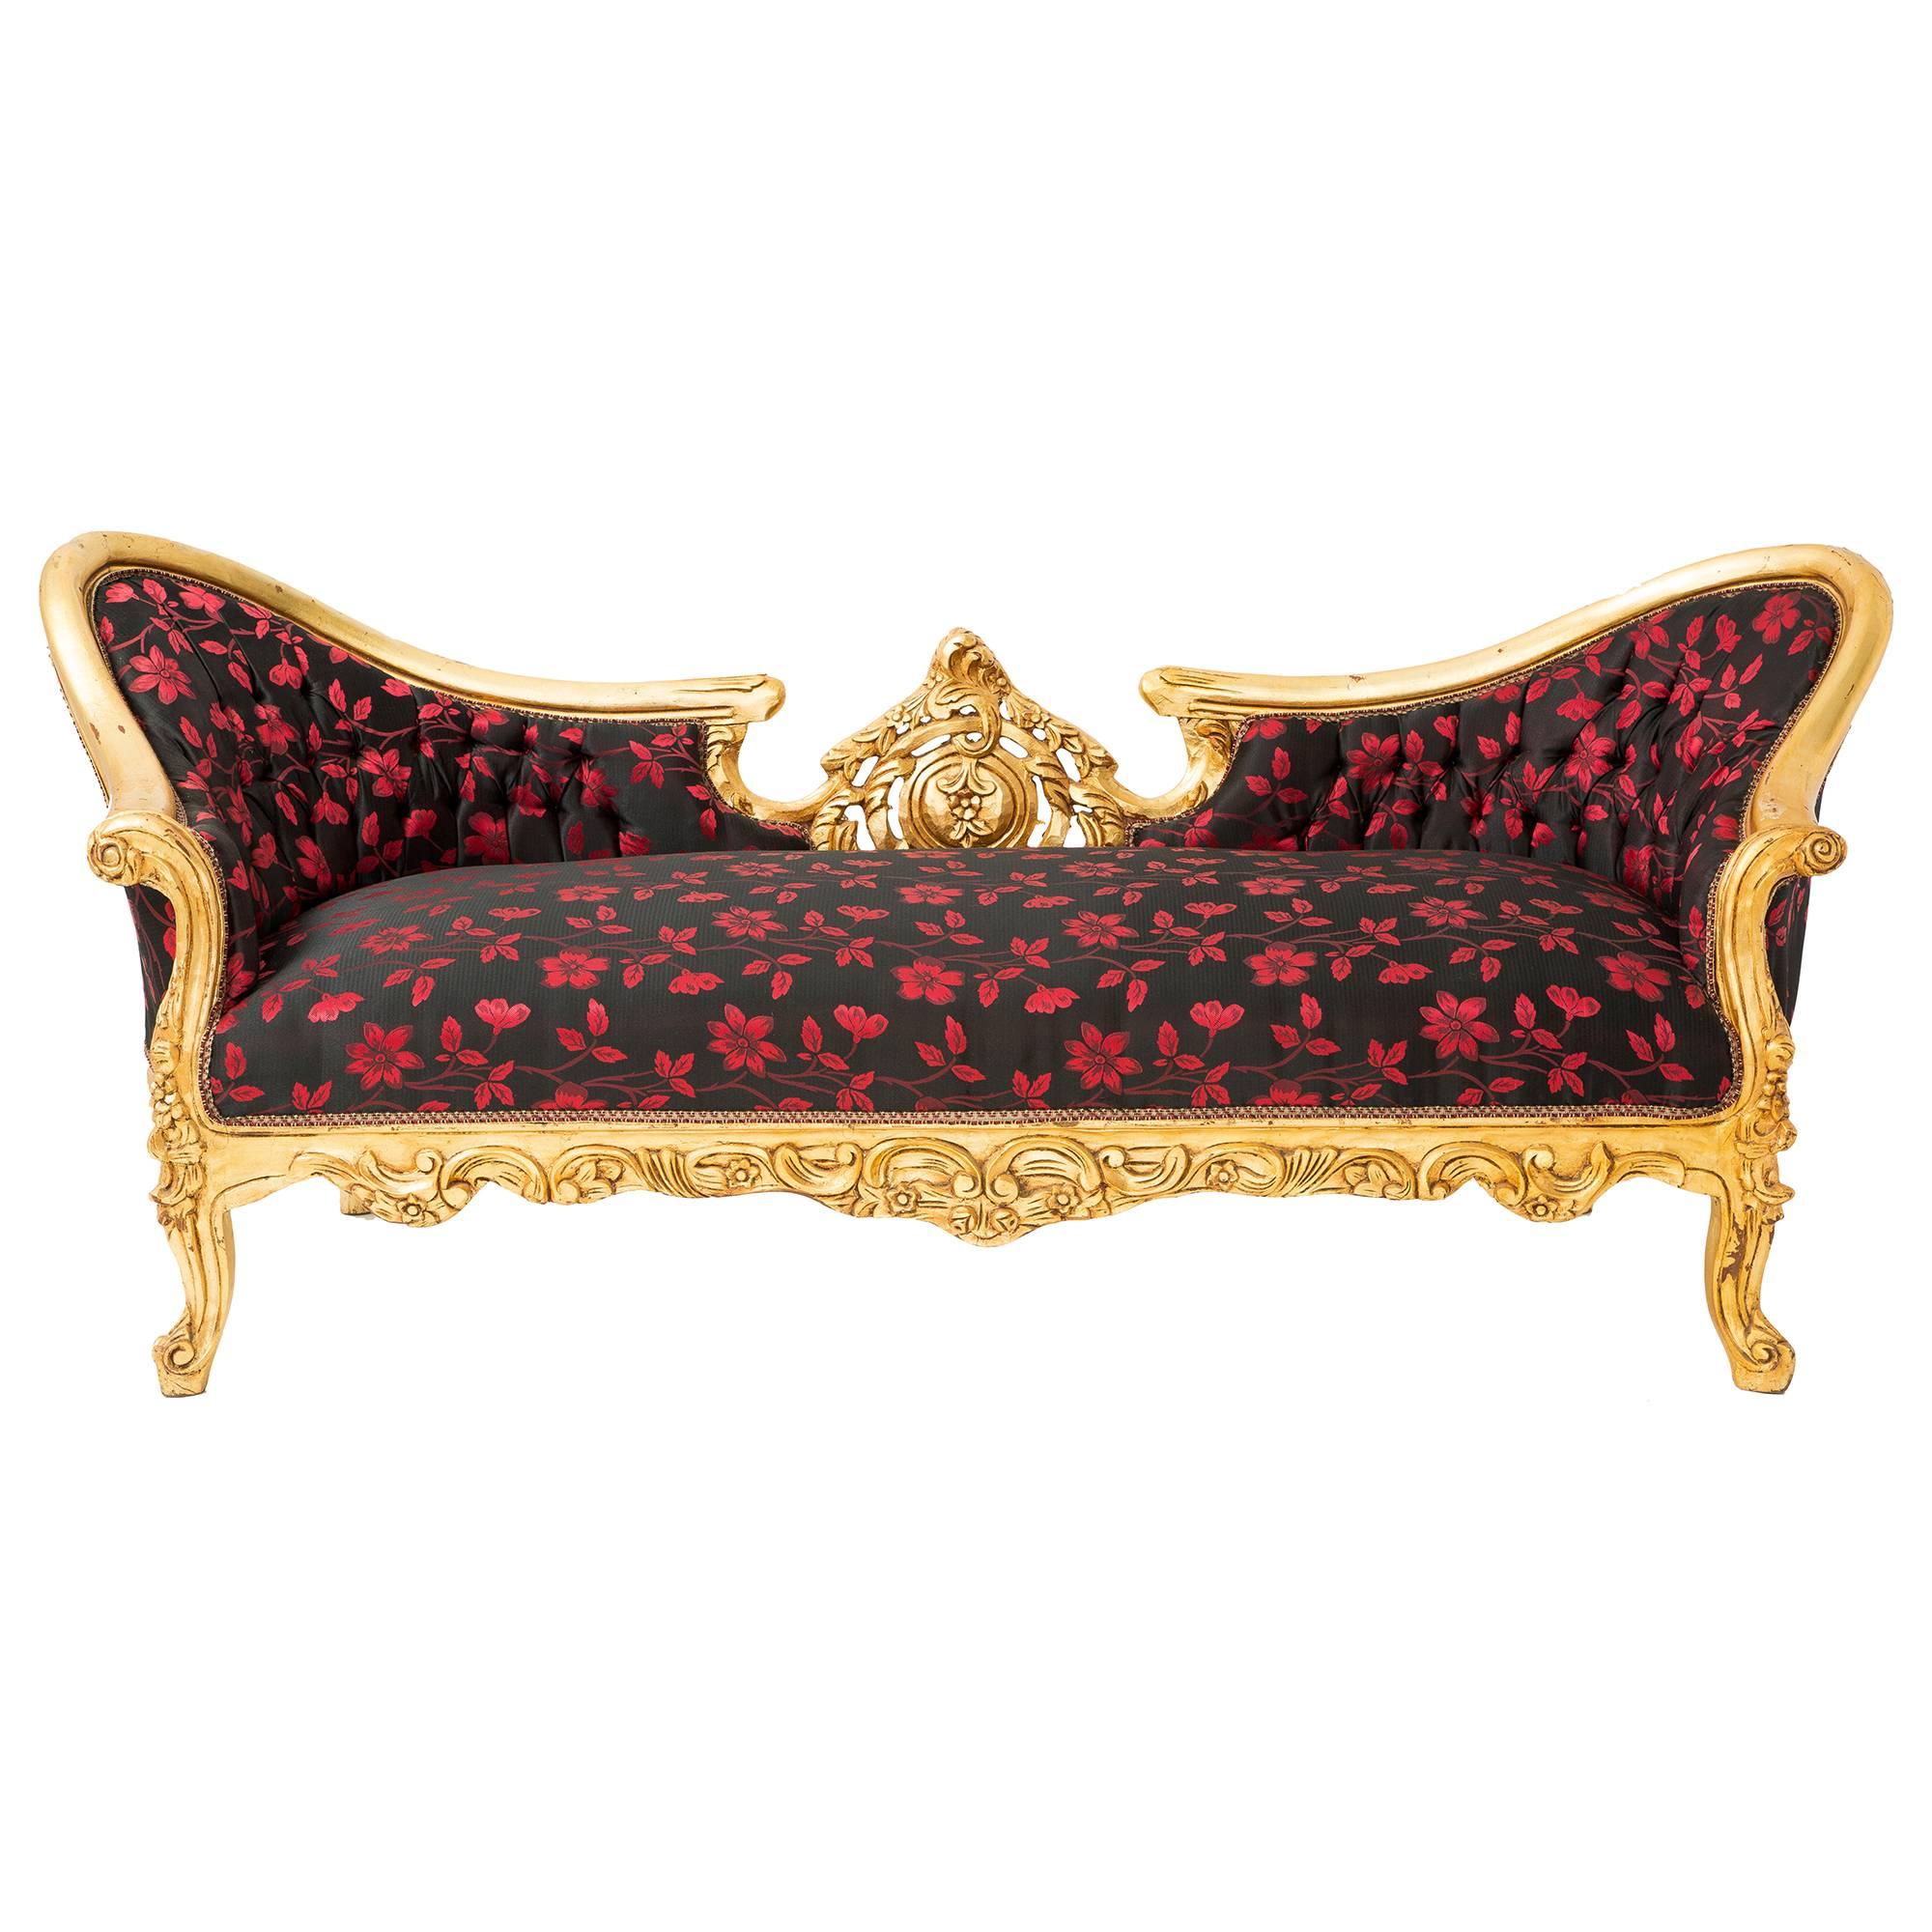 French Style Settee Sofa with Ornate Carved Gold Frame - ON SALE